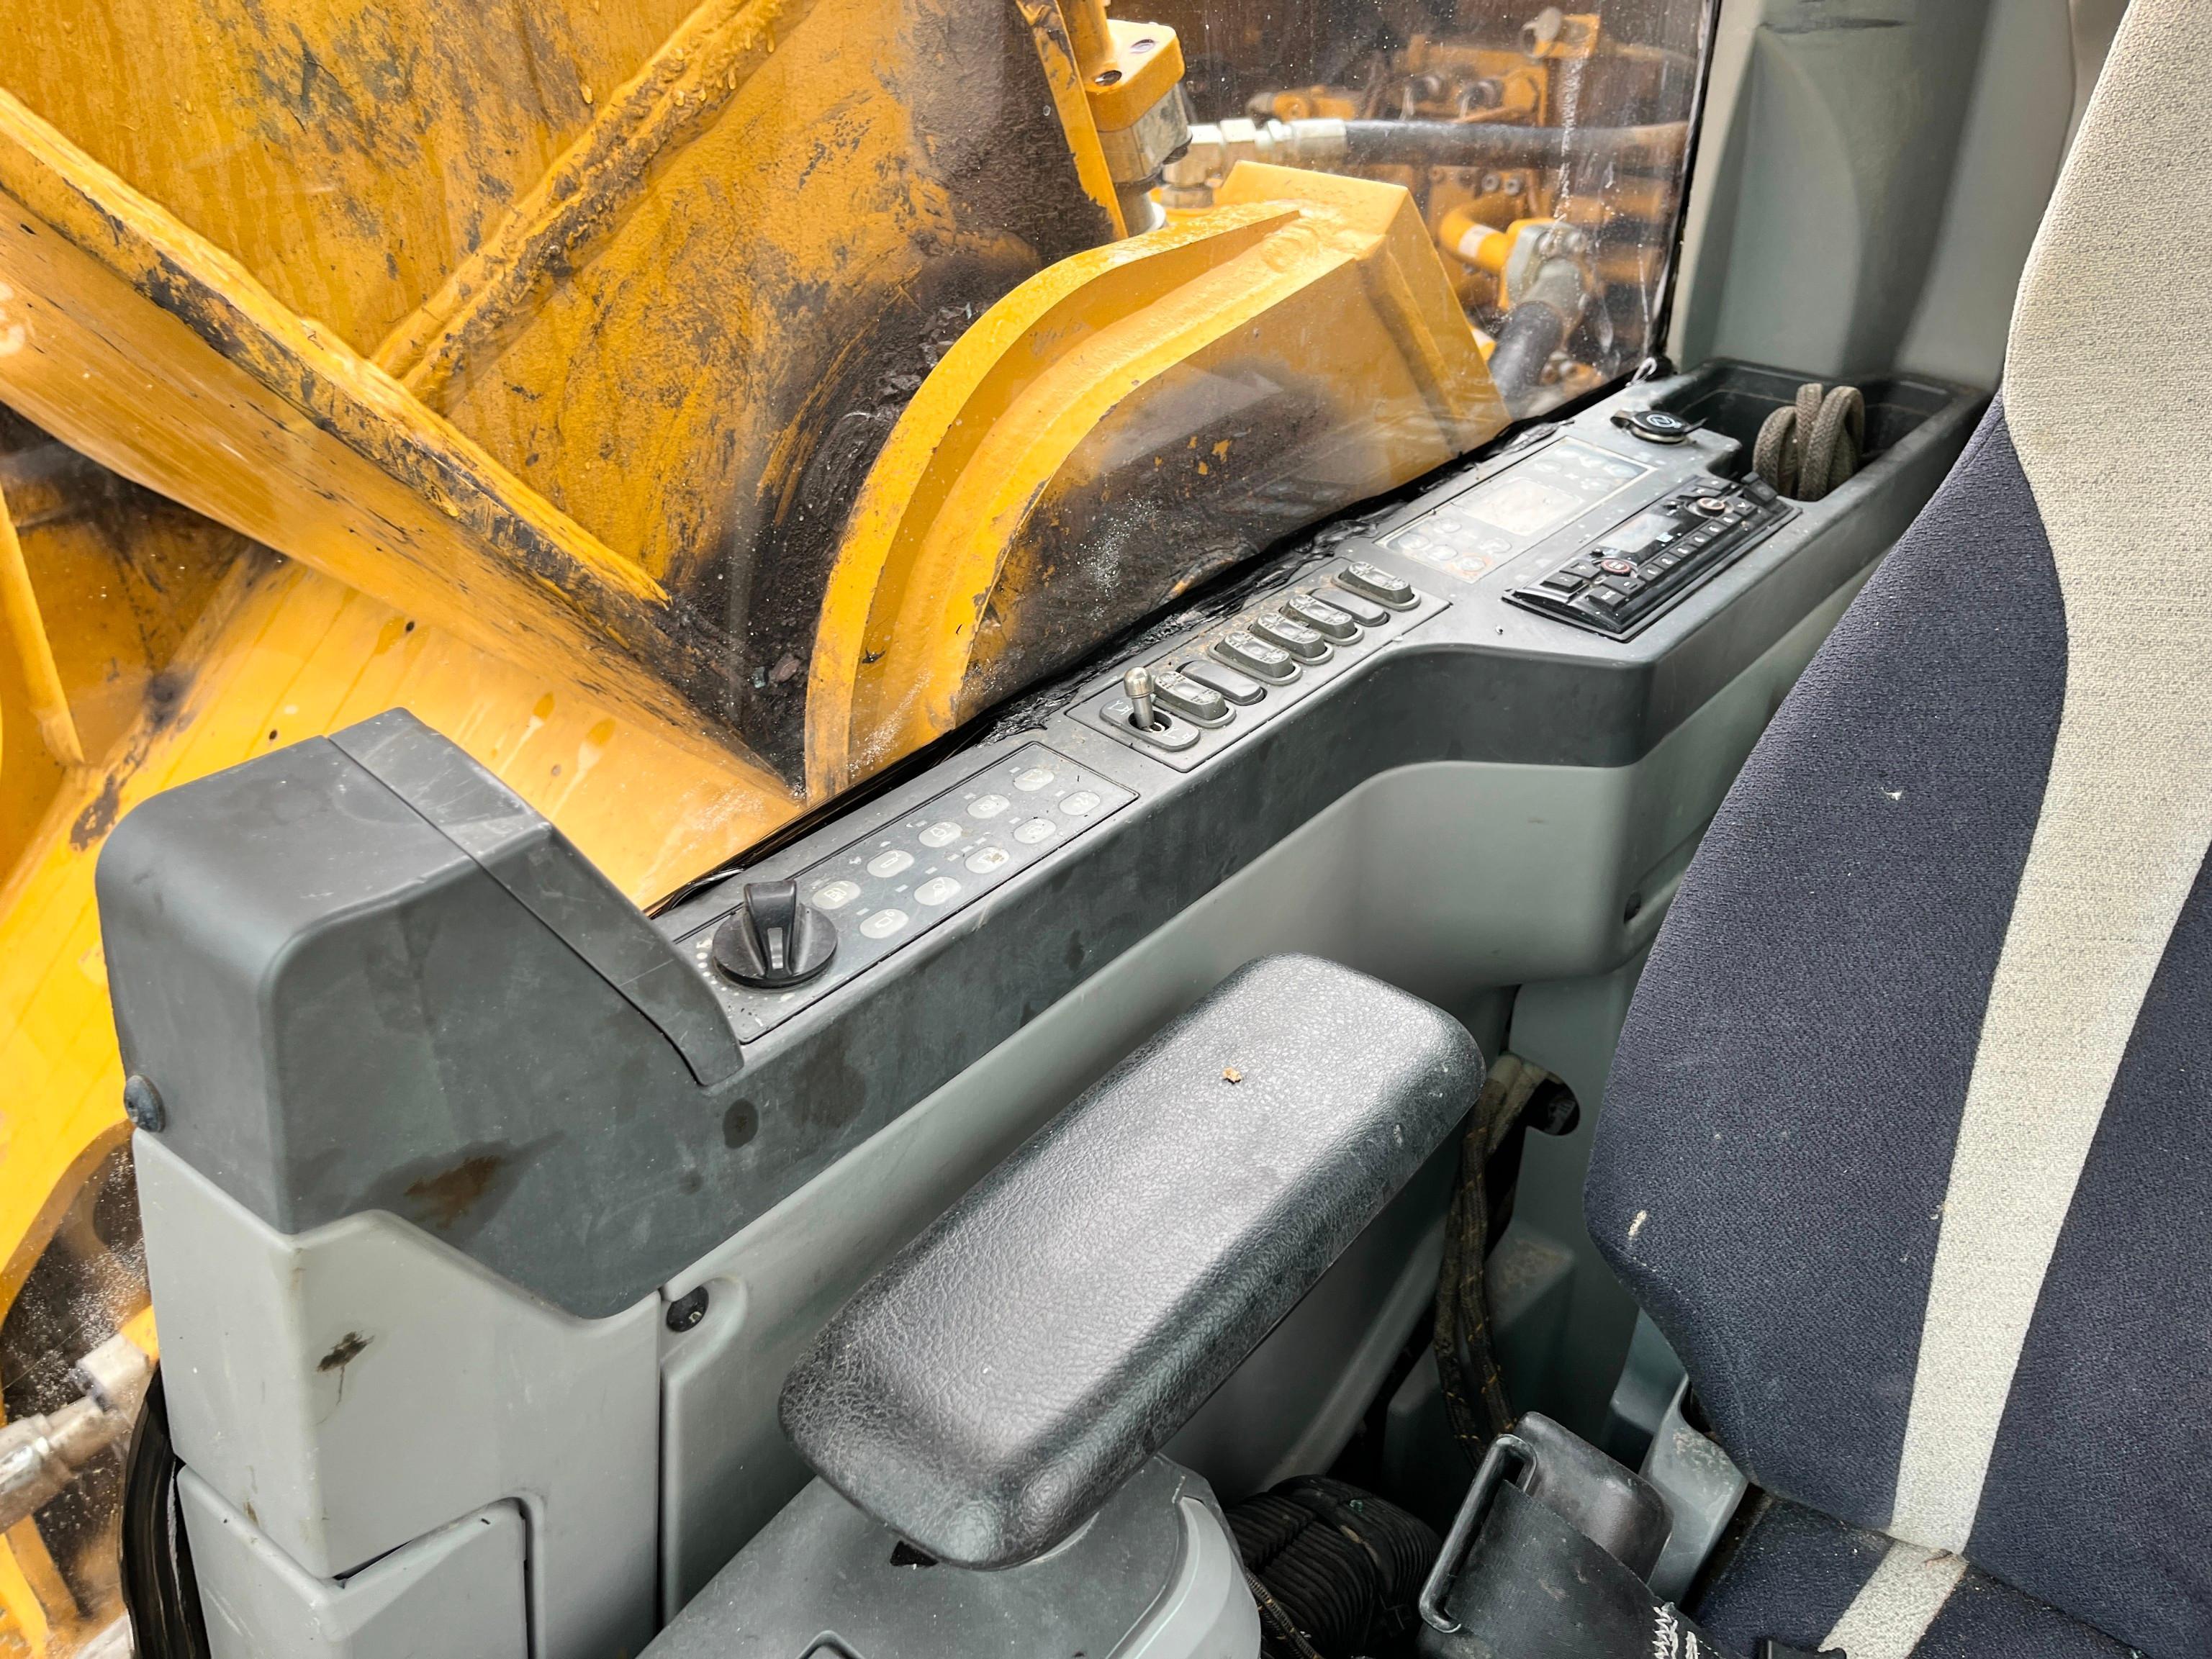 2018 CAT 336FL HYDRAULIC EXCAVATOR SN:CAT0336FCRKB21244 powered by Cat C9.3 diesel engine, equipped